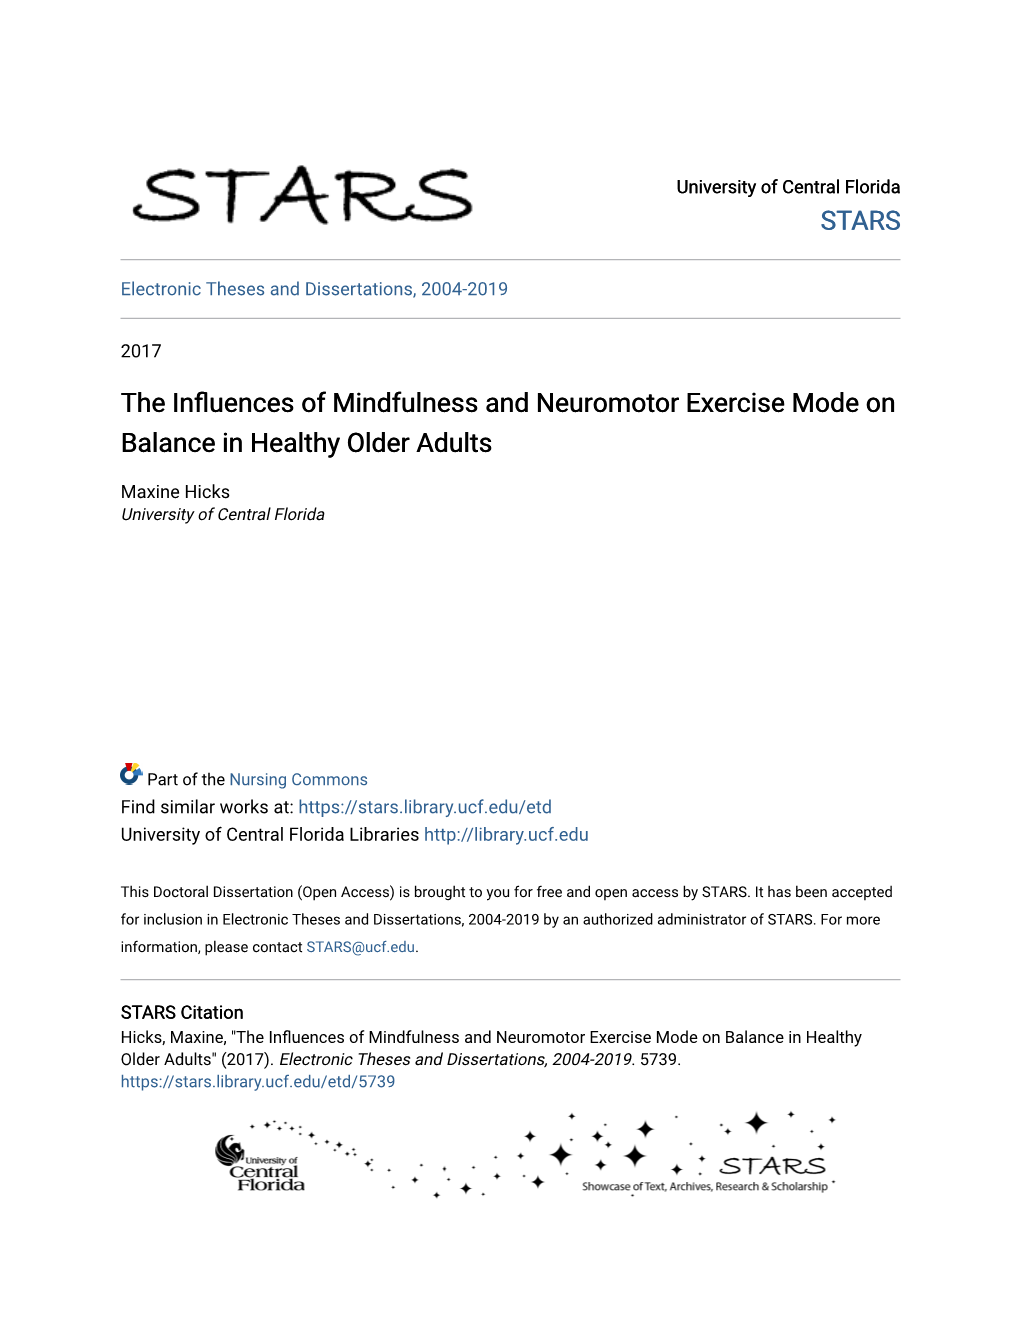 The Influences of Mindfulness and Neuromotor Exercise Mode on Balance in Healthy Older Adults